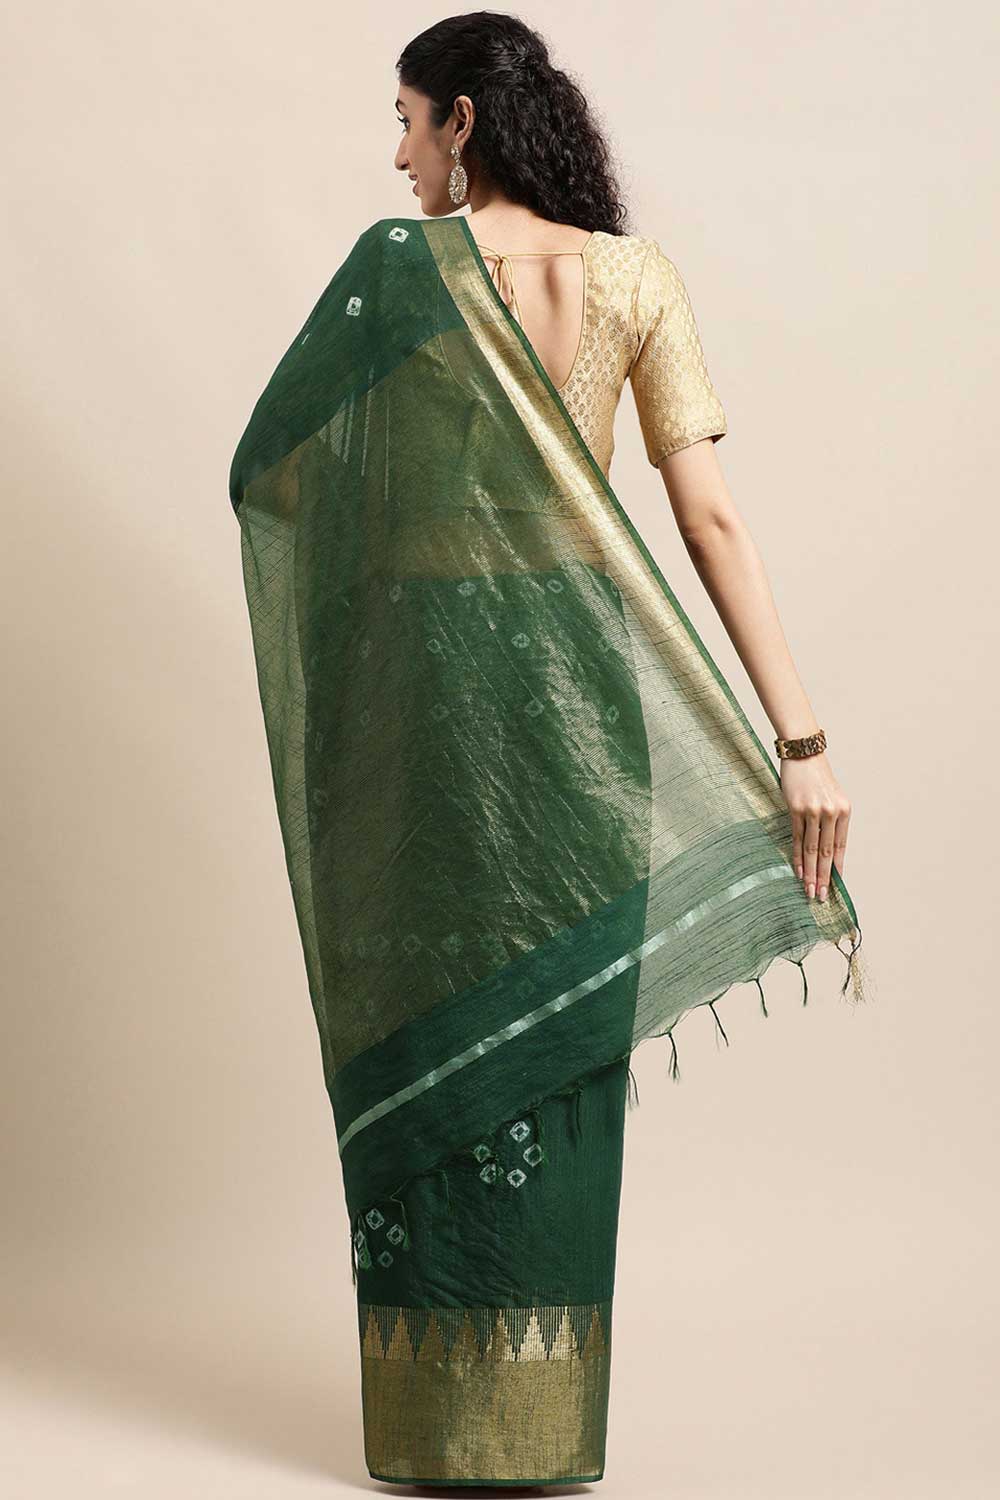 Shop Jesse Green Zari Woven Blended Silk One Minute Saree at best offer at our  Store - One Minute Saree